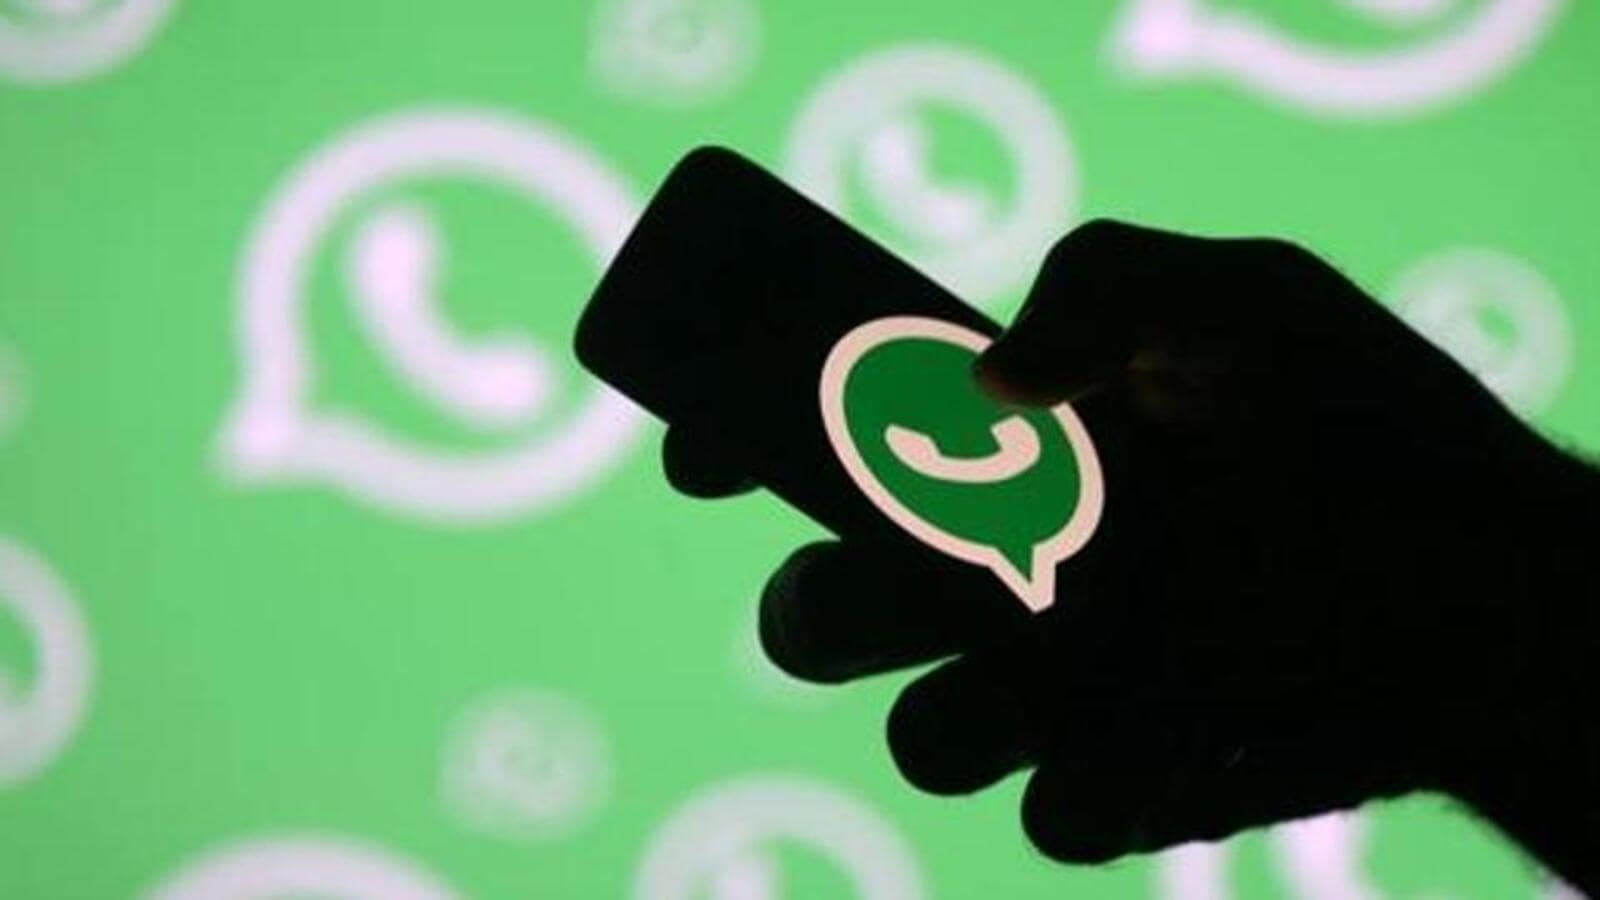 2-3-million-indian-accounts-banned-in-august-says-whatsapp-report